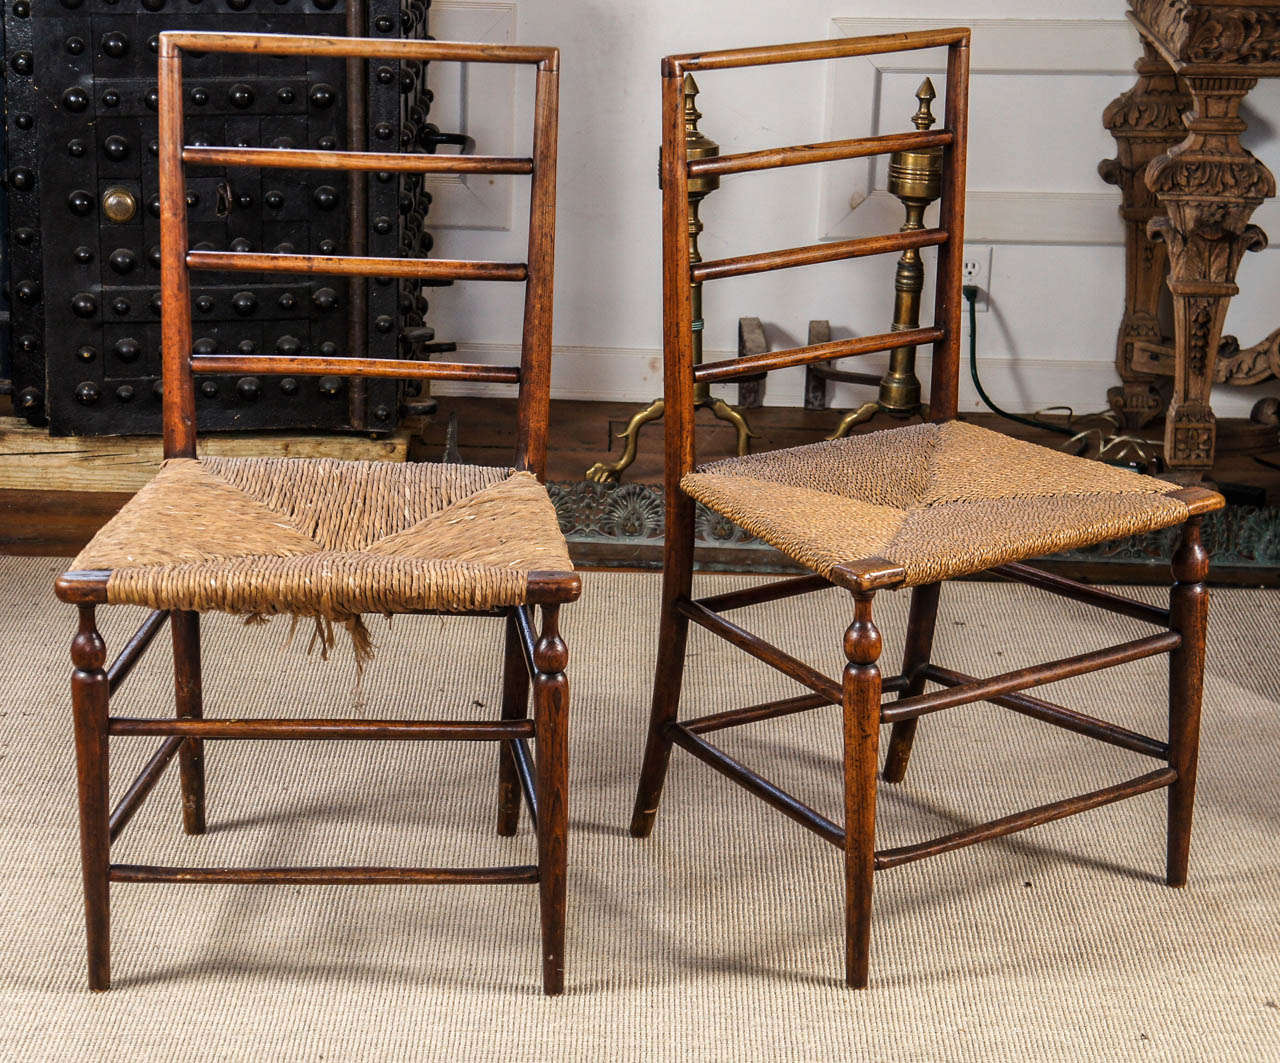 Fine set of four English Elm side chairs. Two with rush seats and two with rope seats.